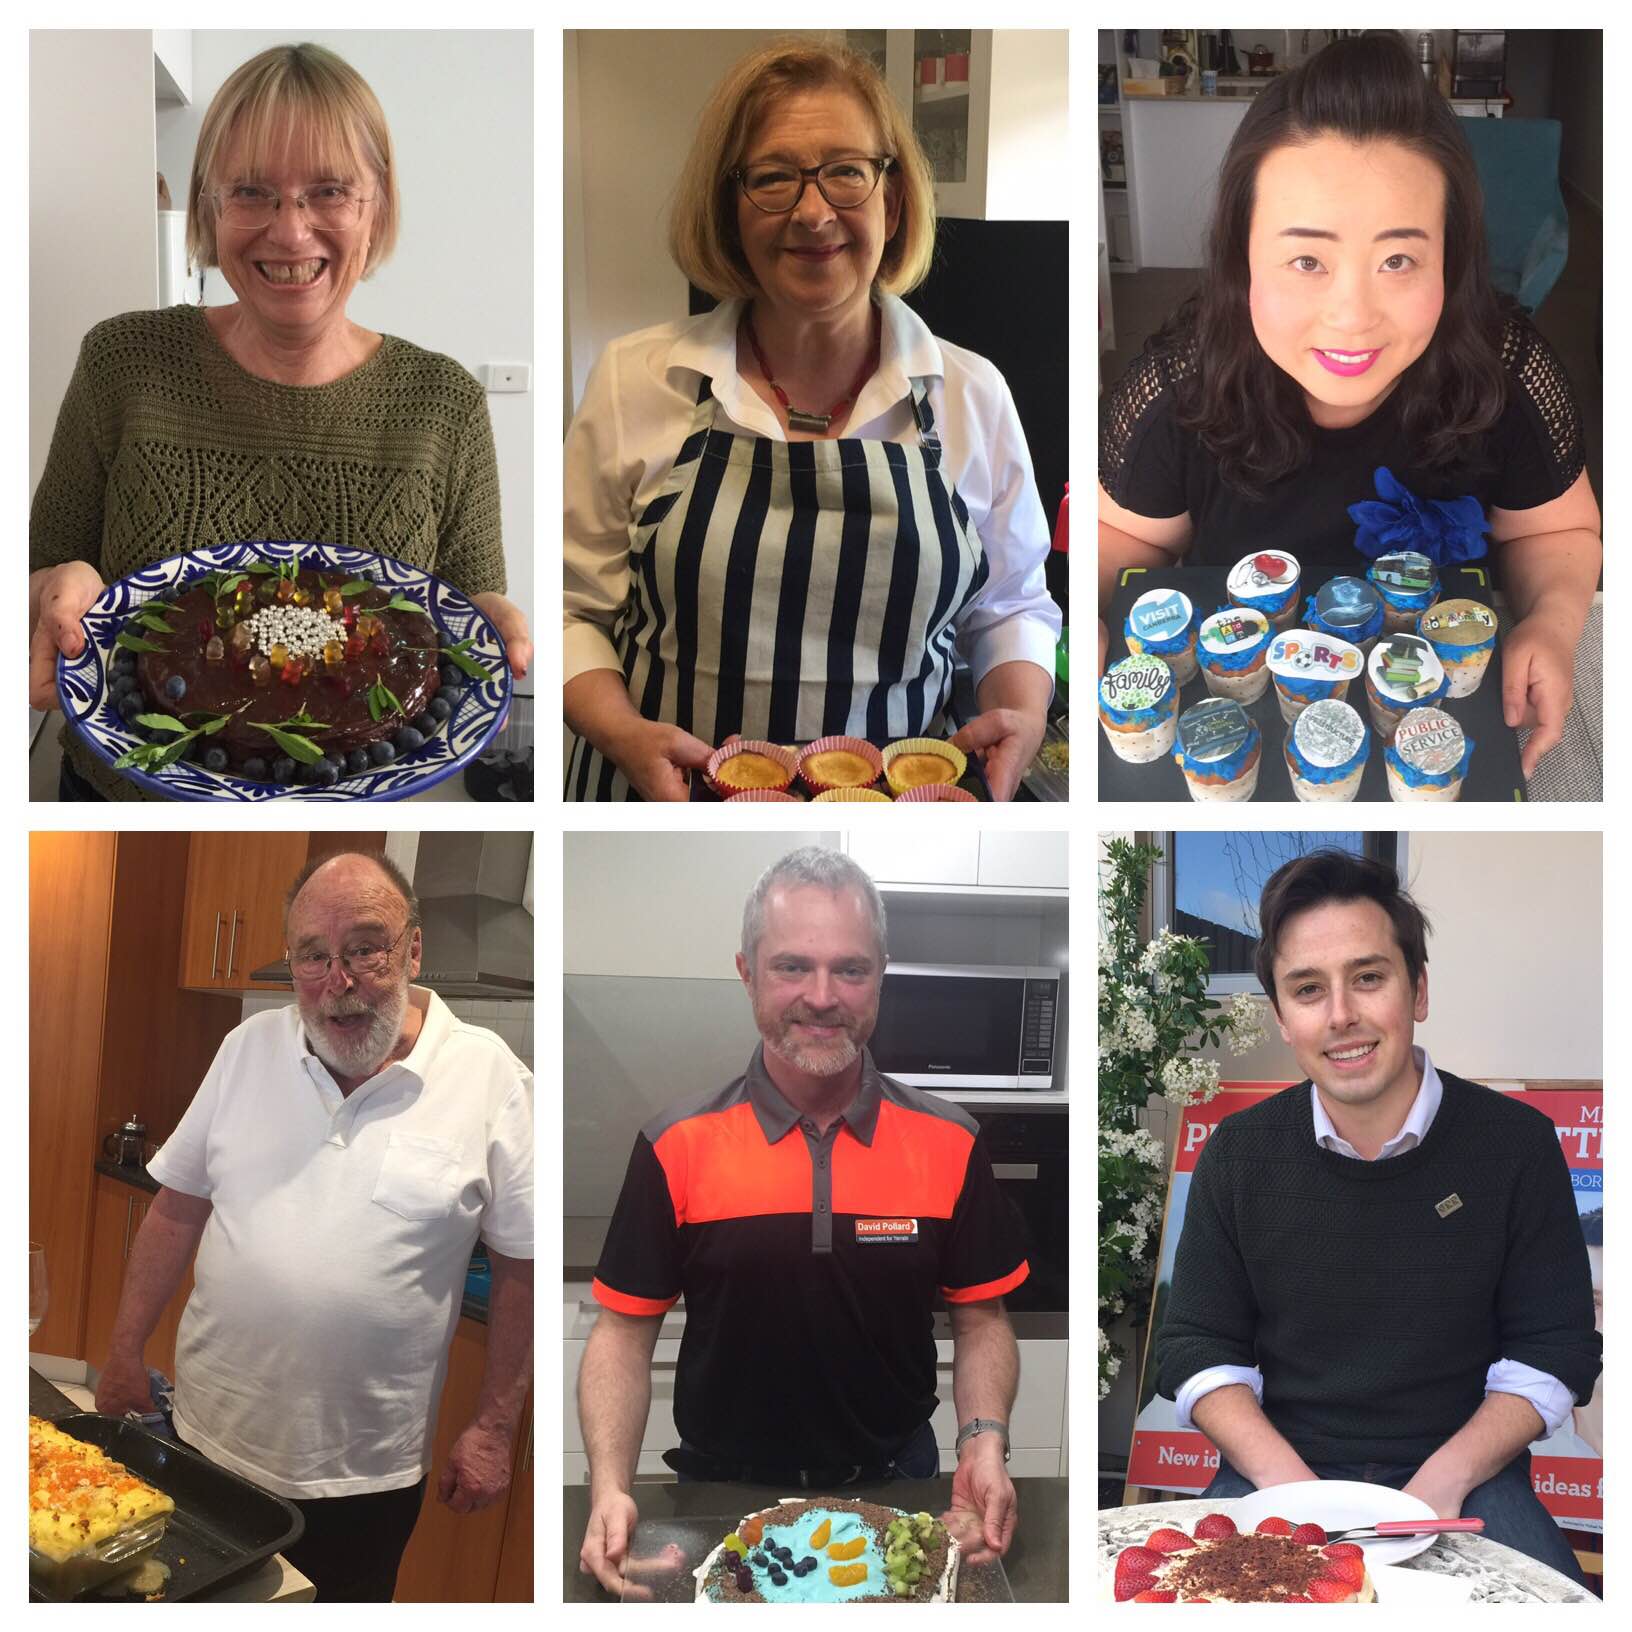 Vote for the best of our candidate bake-off